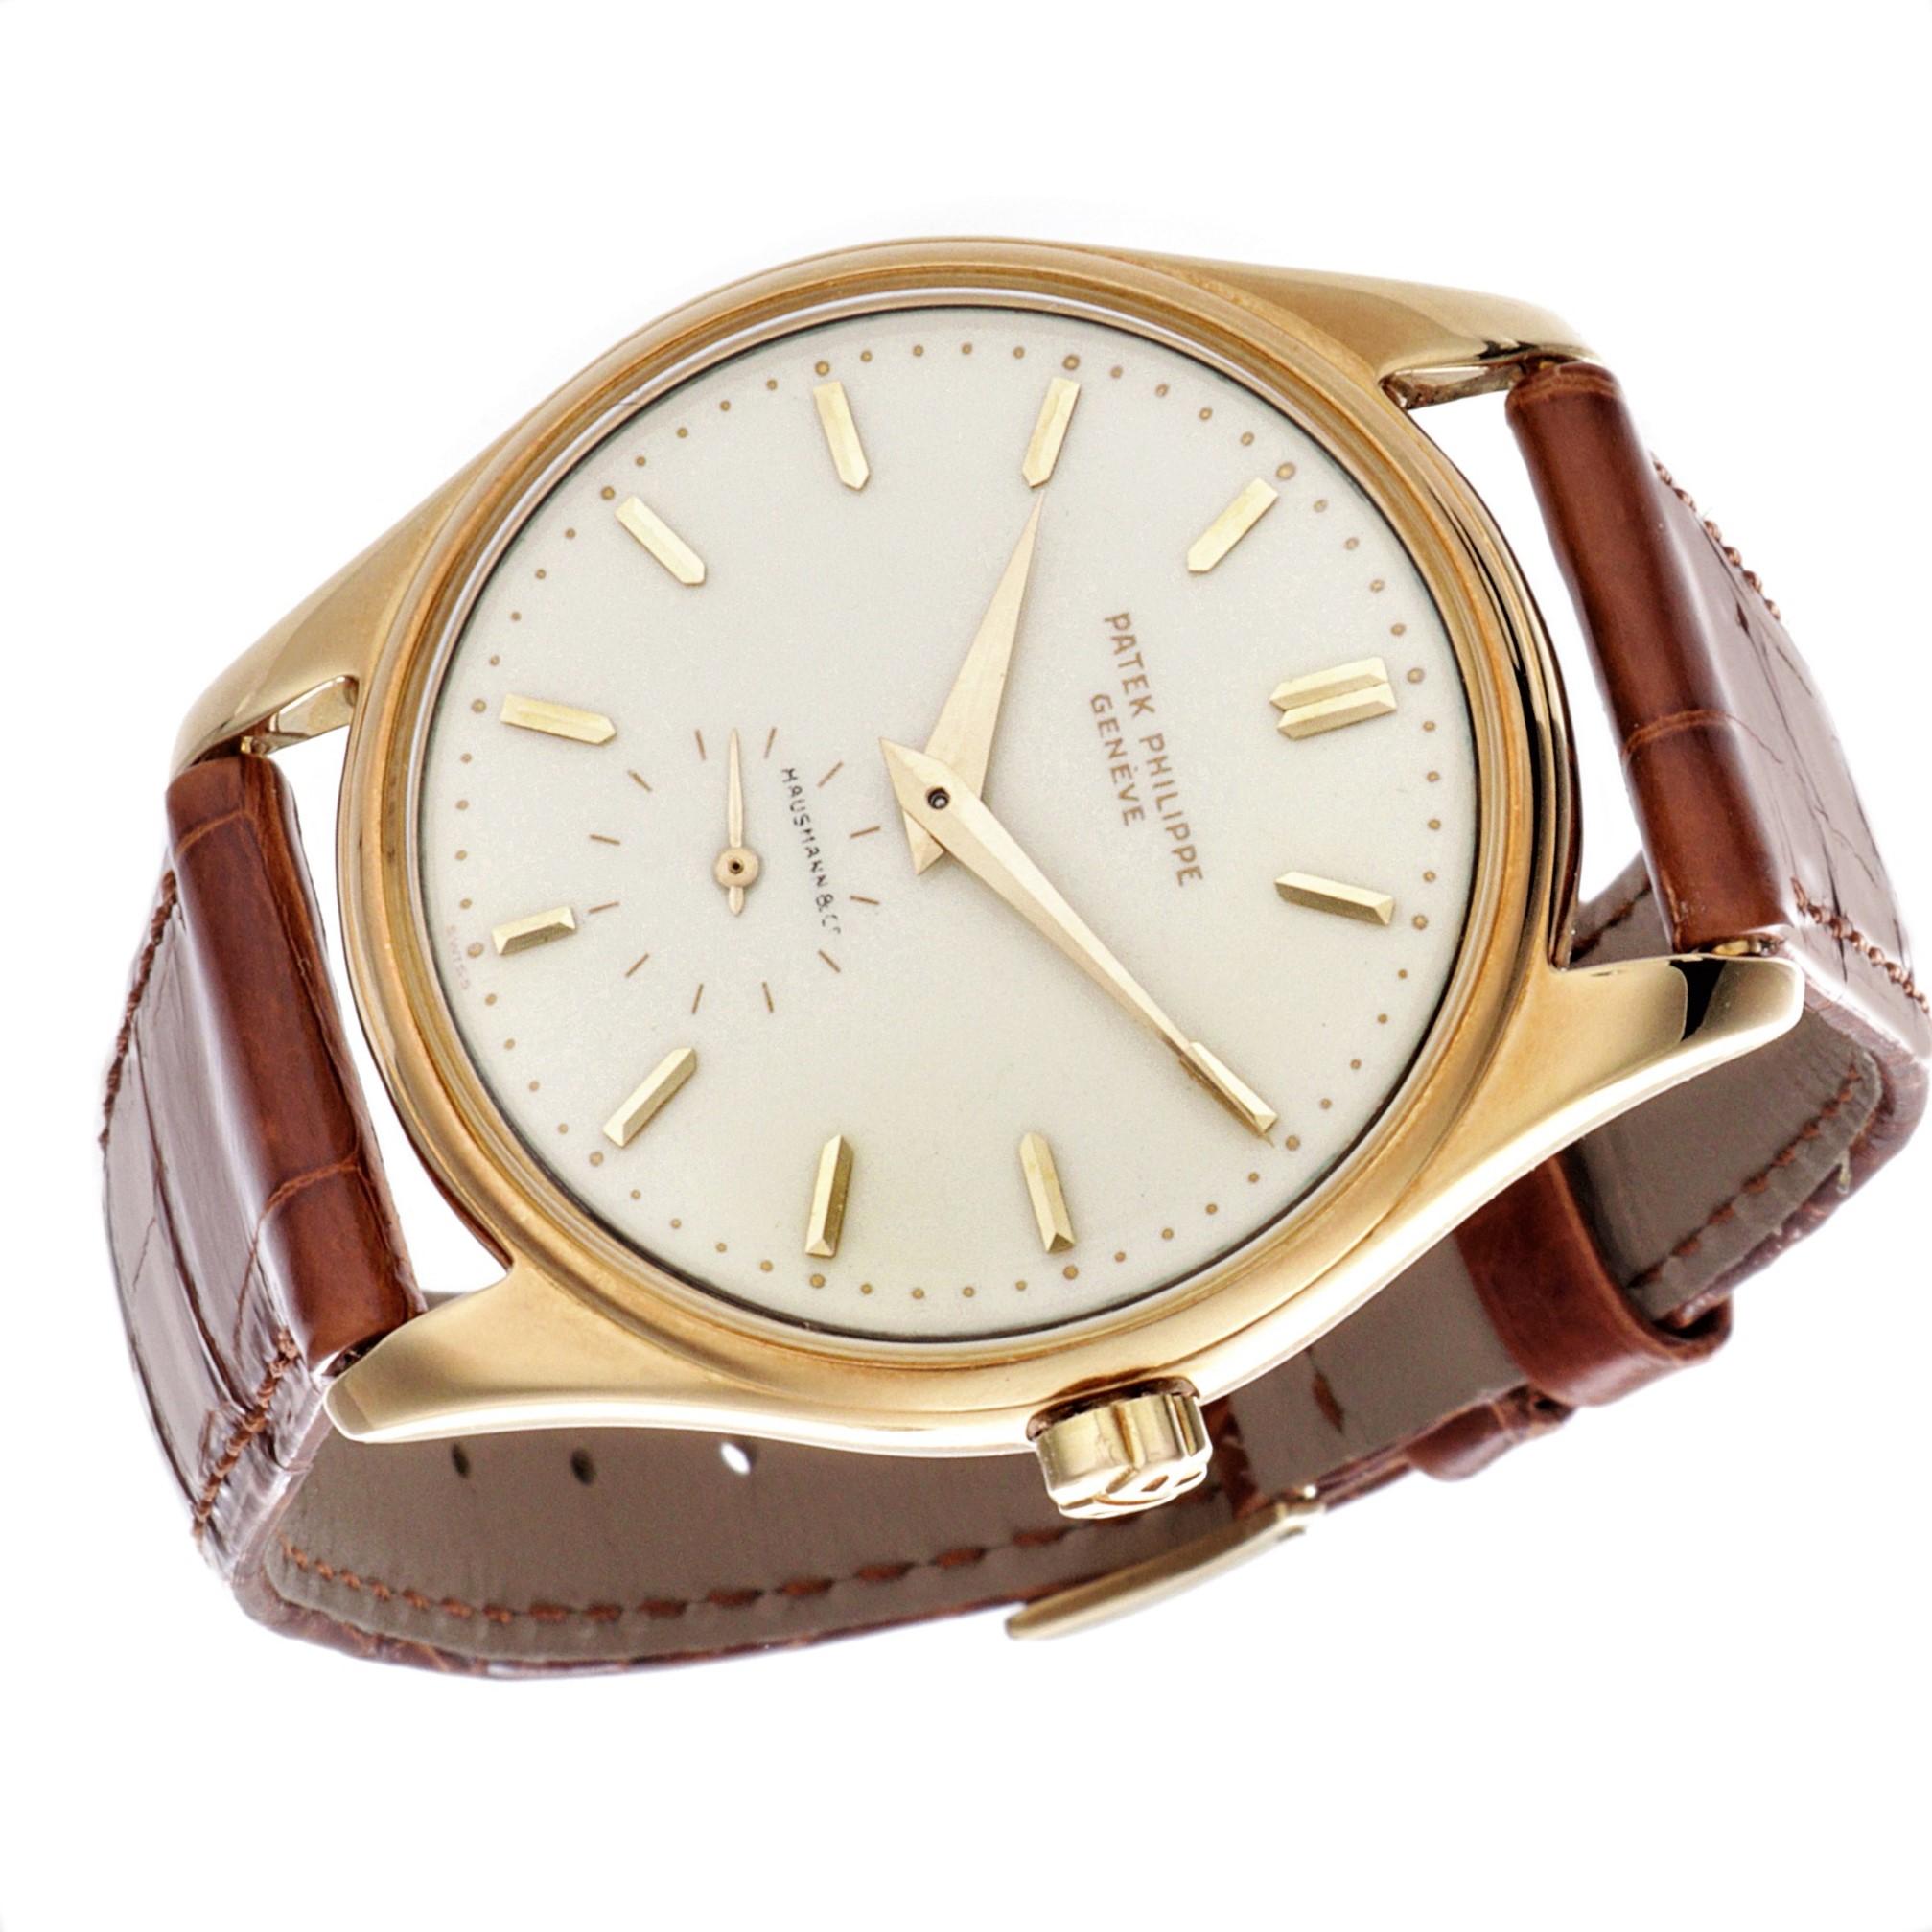 Introduction:
This Patek Philippe 2526J watch is considered to be the ultimate Vintage Patek Calatrava watch.  It has an Original Porcelain enamel dial signed with Hausmann, screw down back, water resistant case and 12